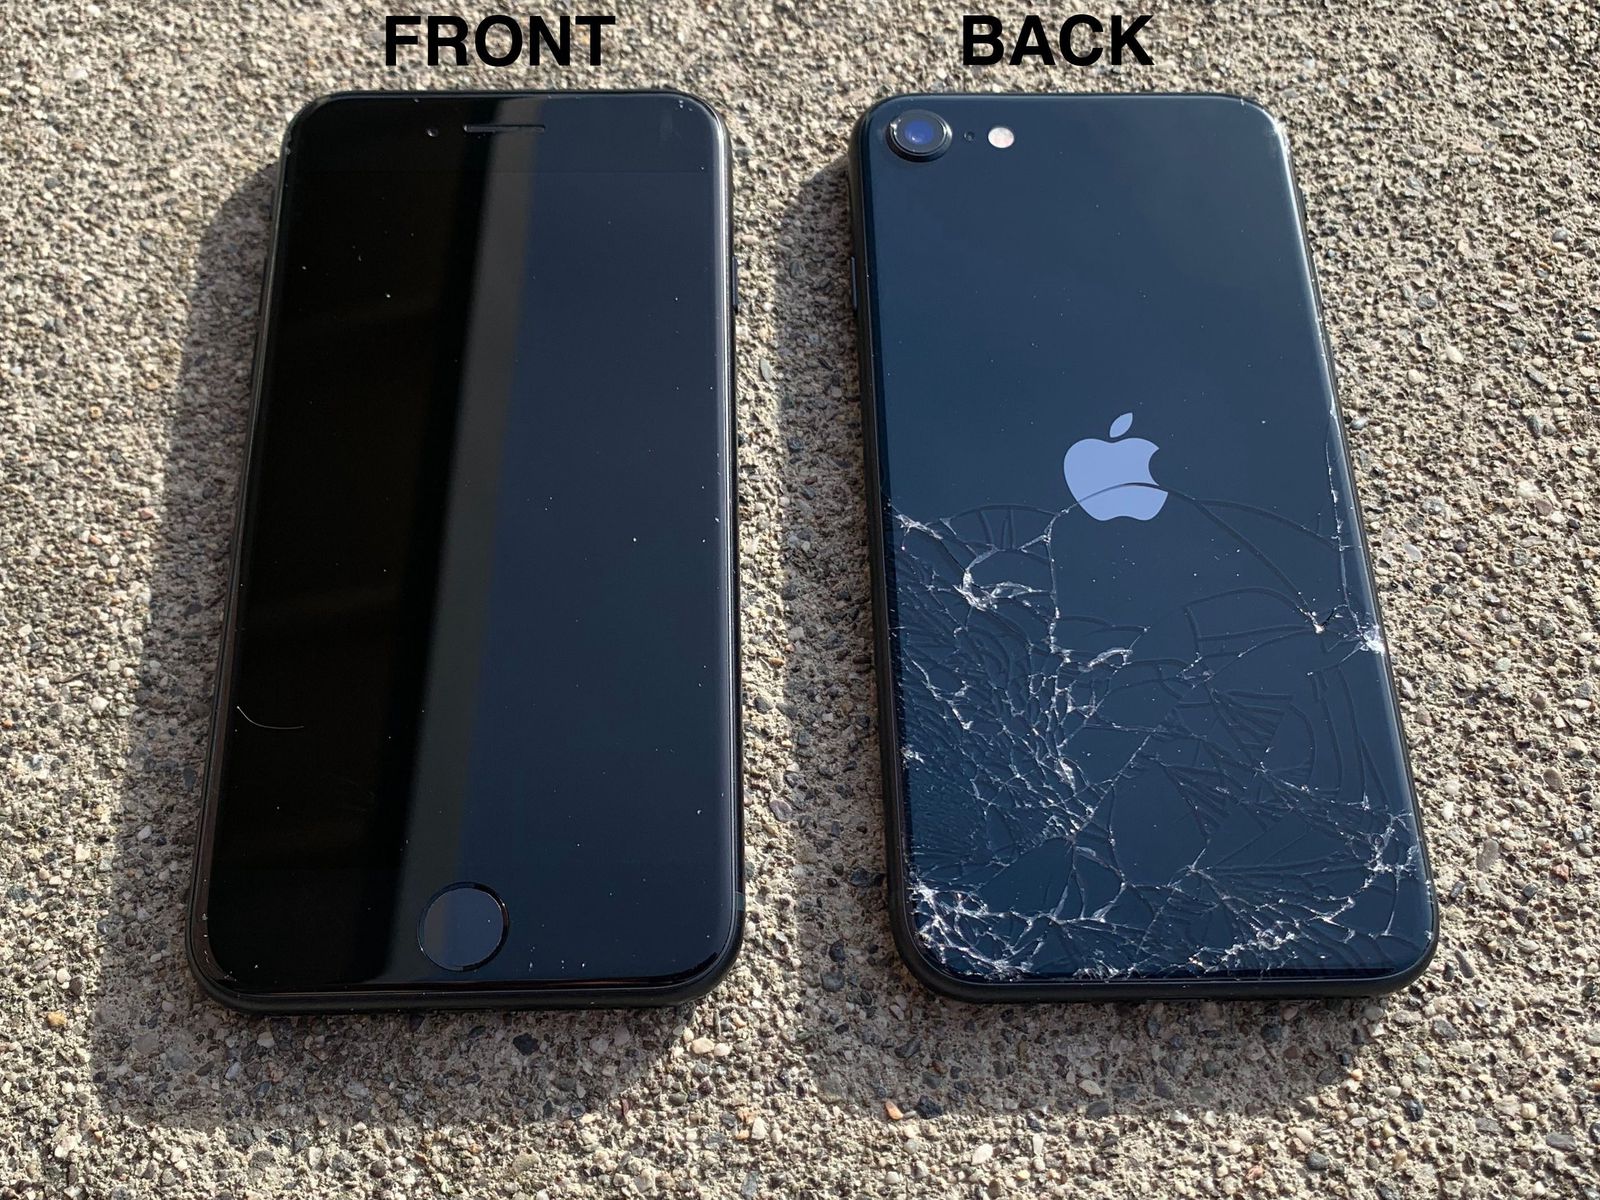 What iPhone has the strongest glass?